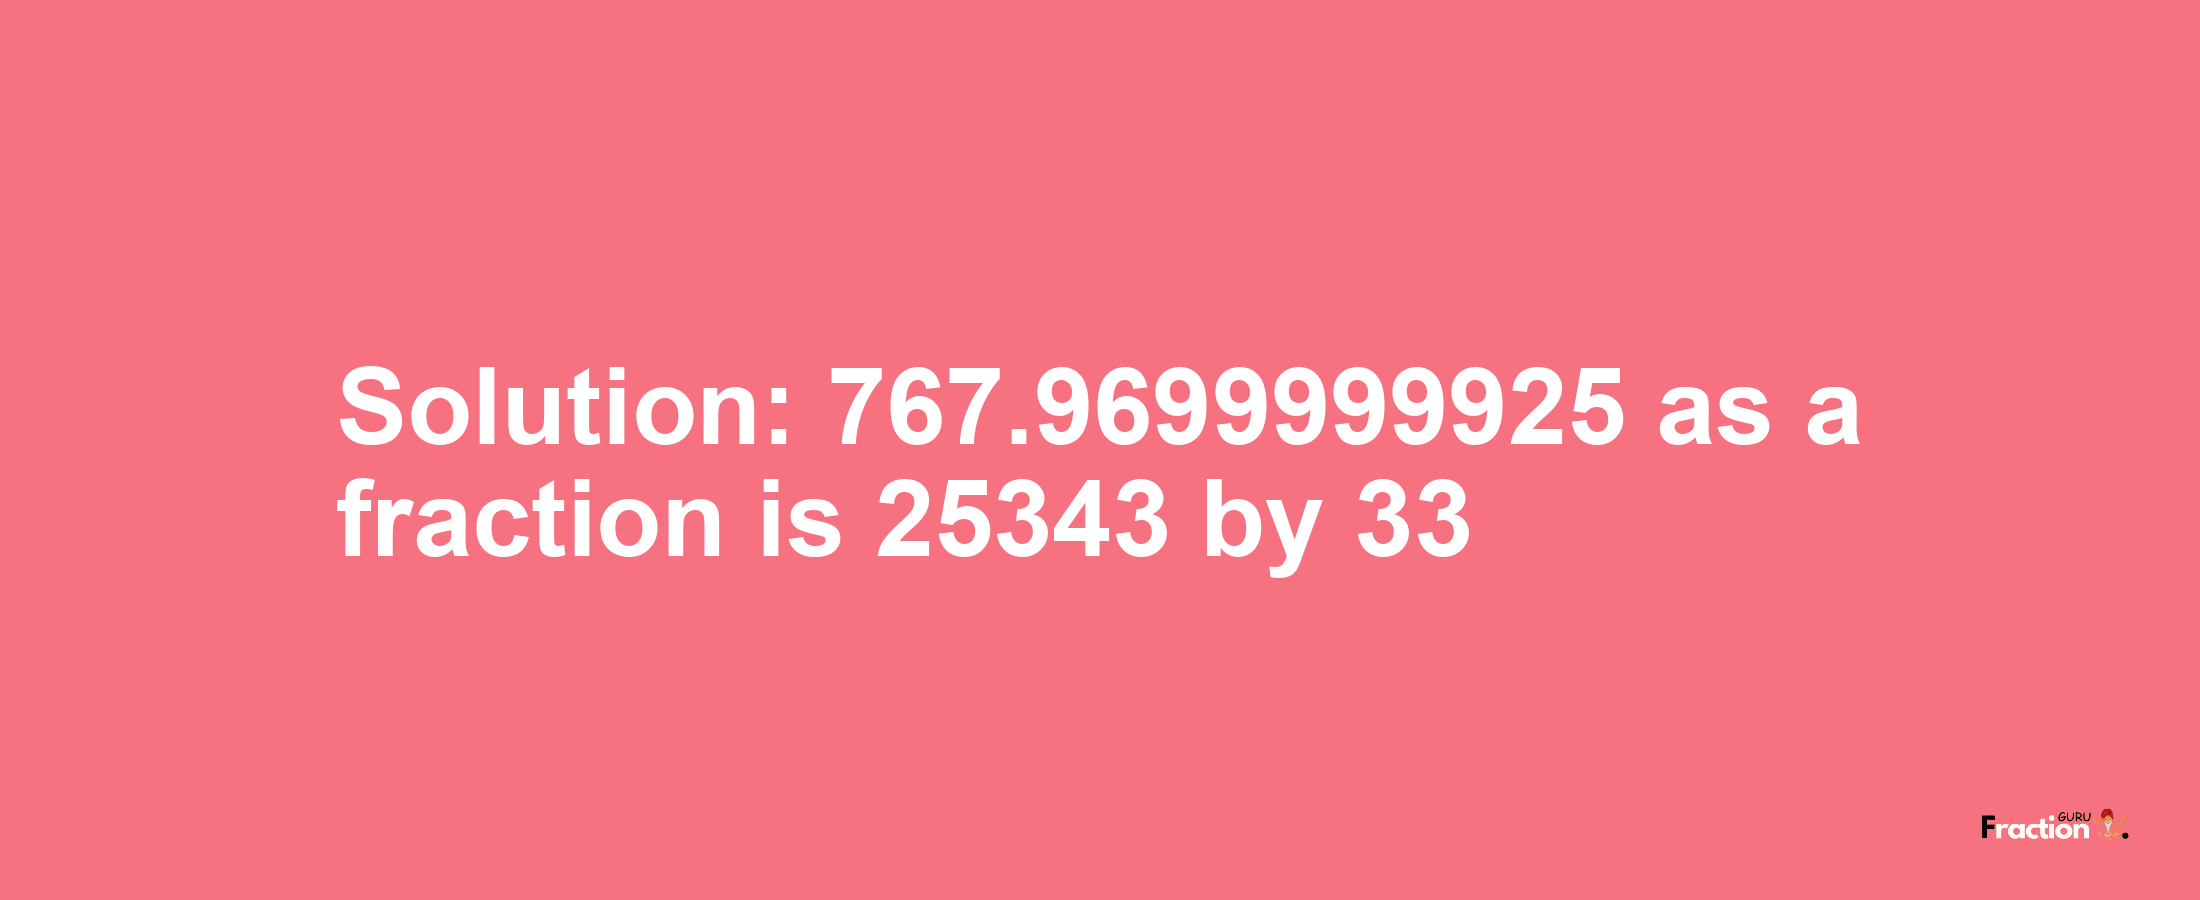 Solution:767.9699999925 as a fraction is 25343/33